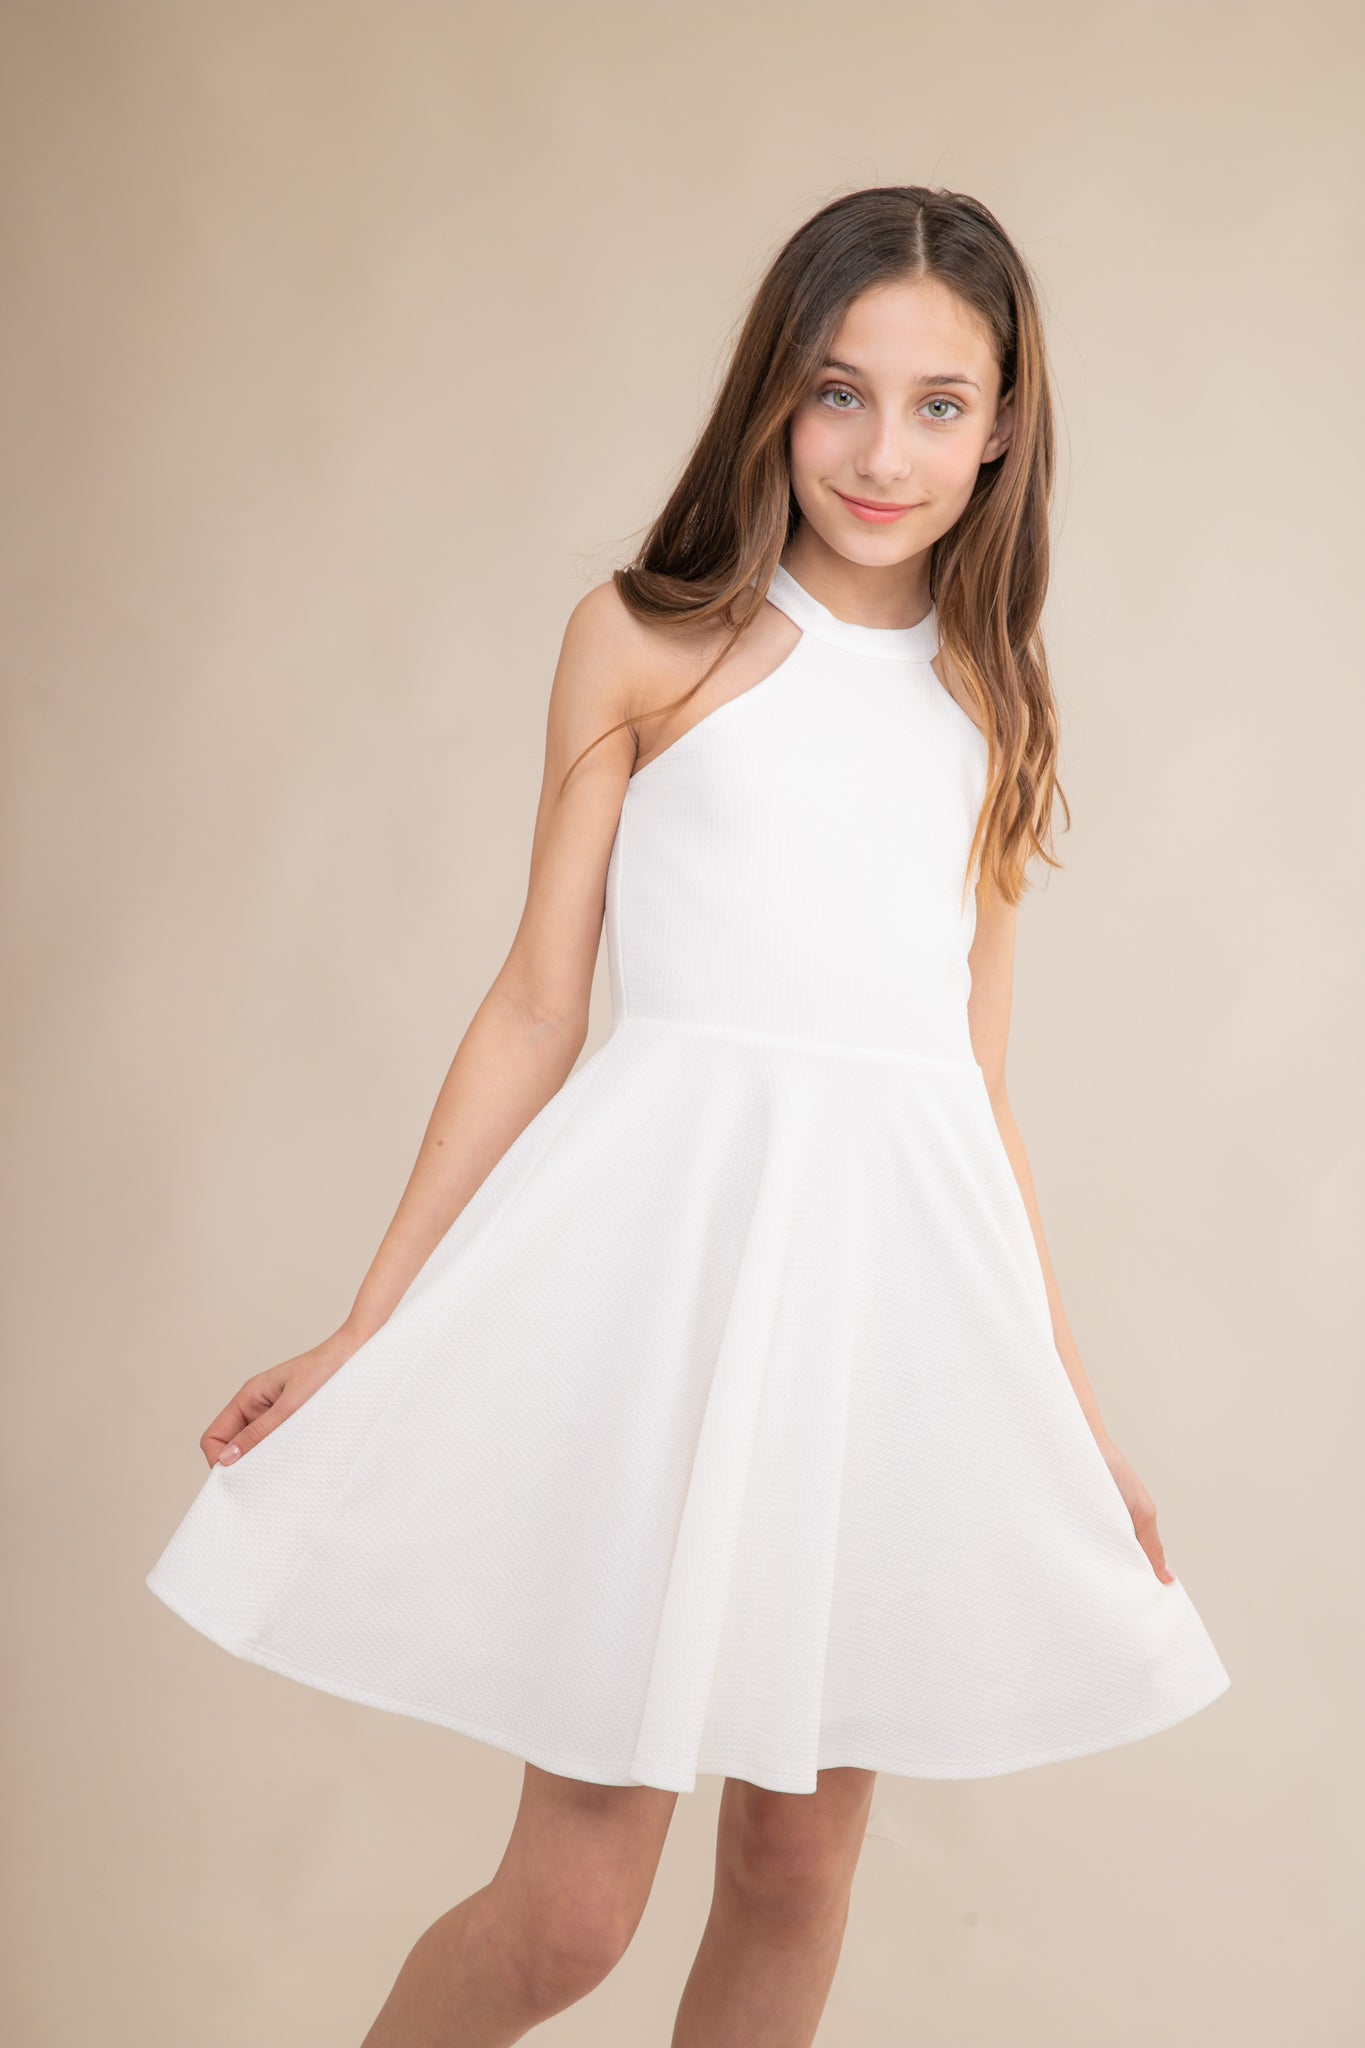 Halter dress in ivory features a full circle twirl skirt, open hole detailing in back and high waist line for a chic silhouette.